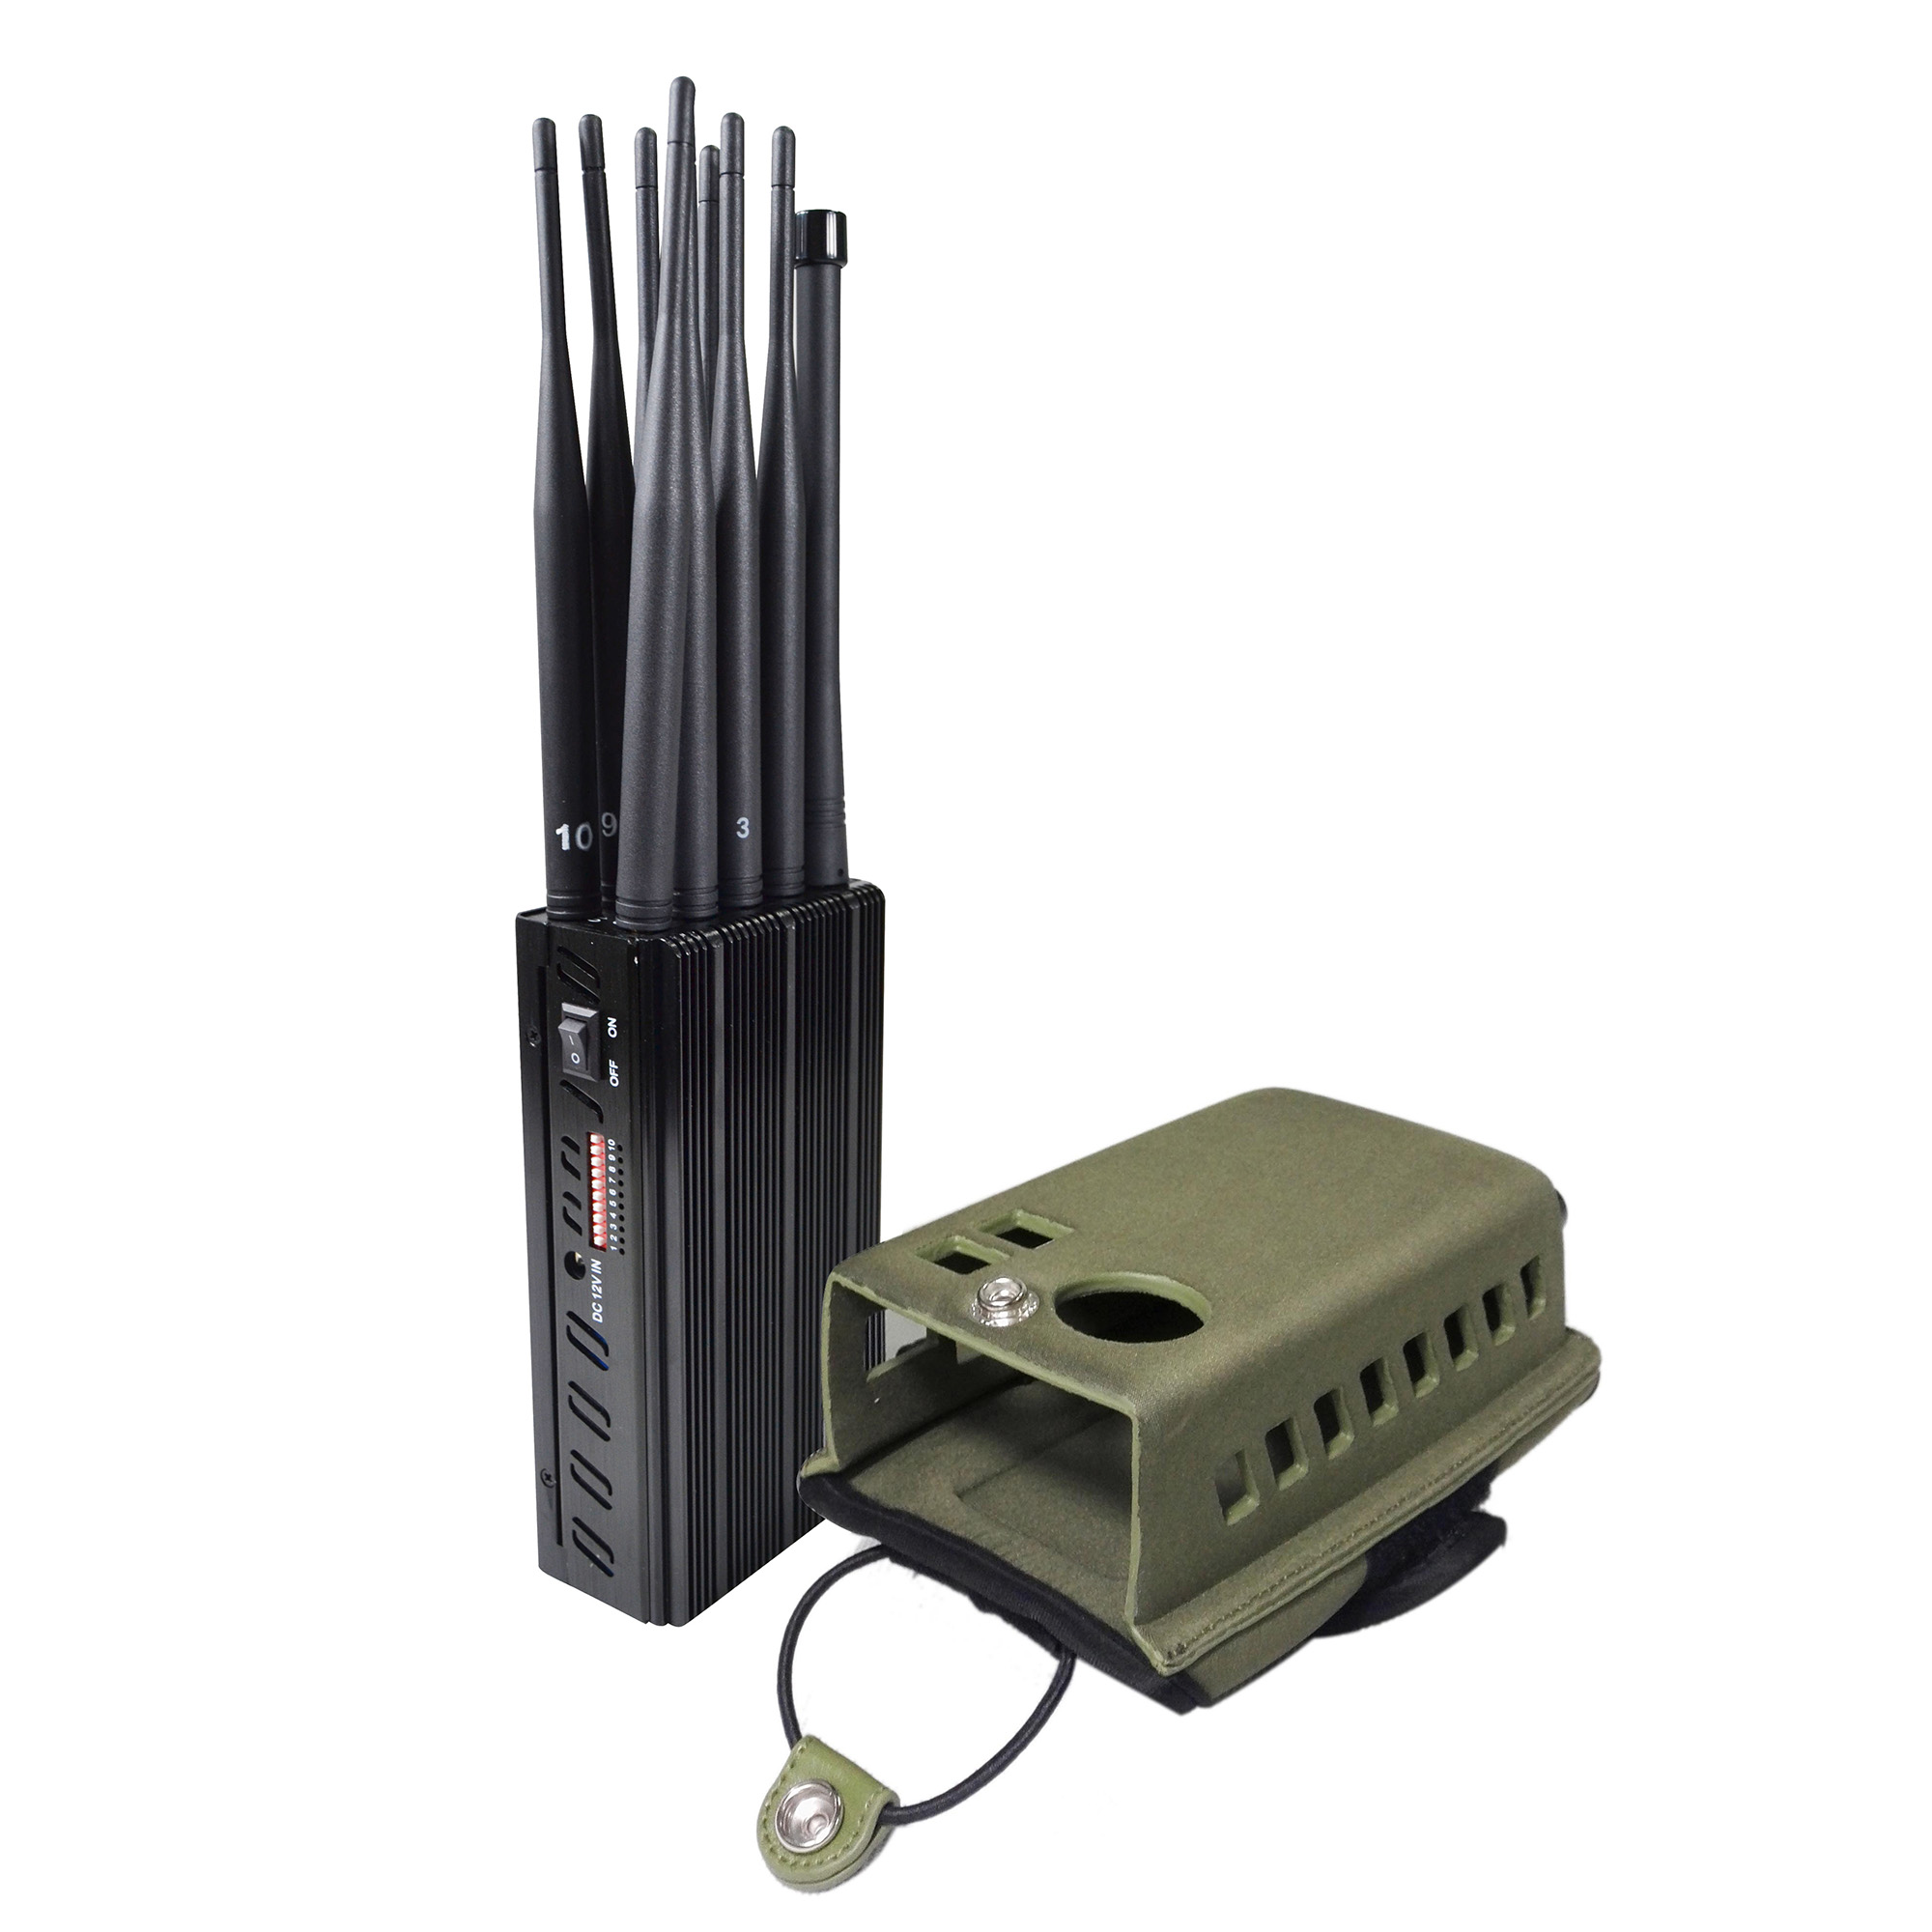 mobile signal jammer